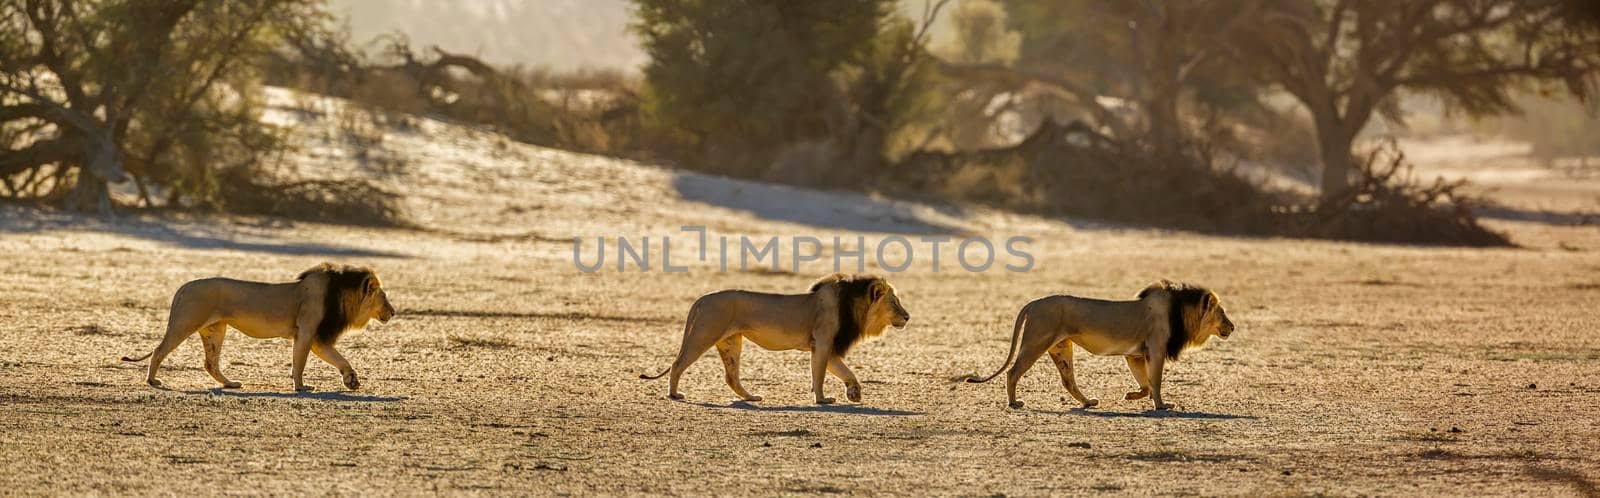 African lion in Kgalagadi transfrontier park, South Africa by PACOCOMO